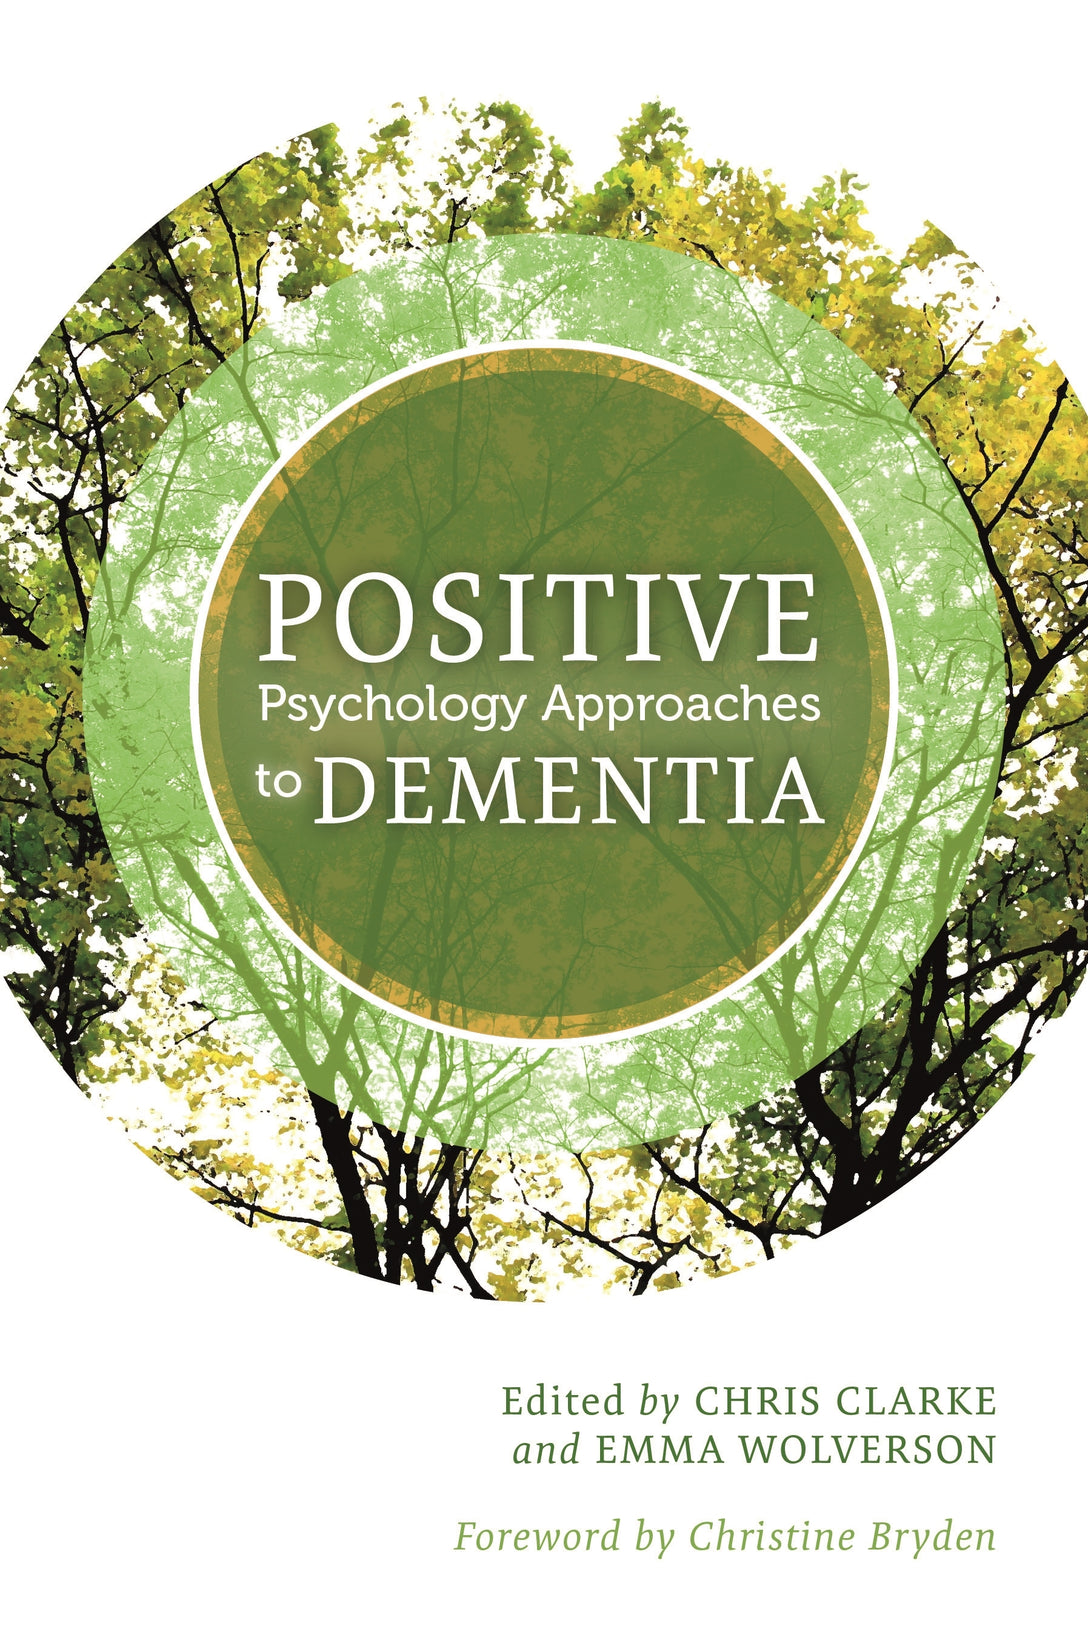 Positive Psychology Approaches to Dementia by Christine Bryden, Chris Clarke, Emma Wolverson, No Author Listed